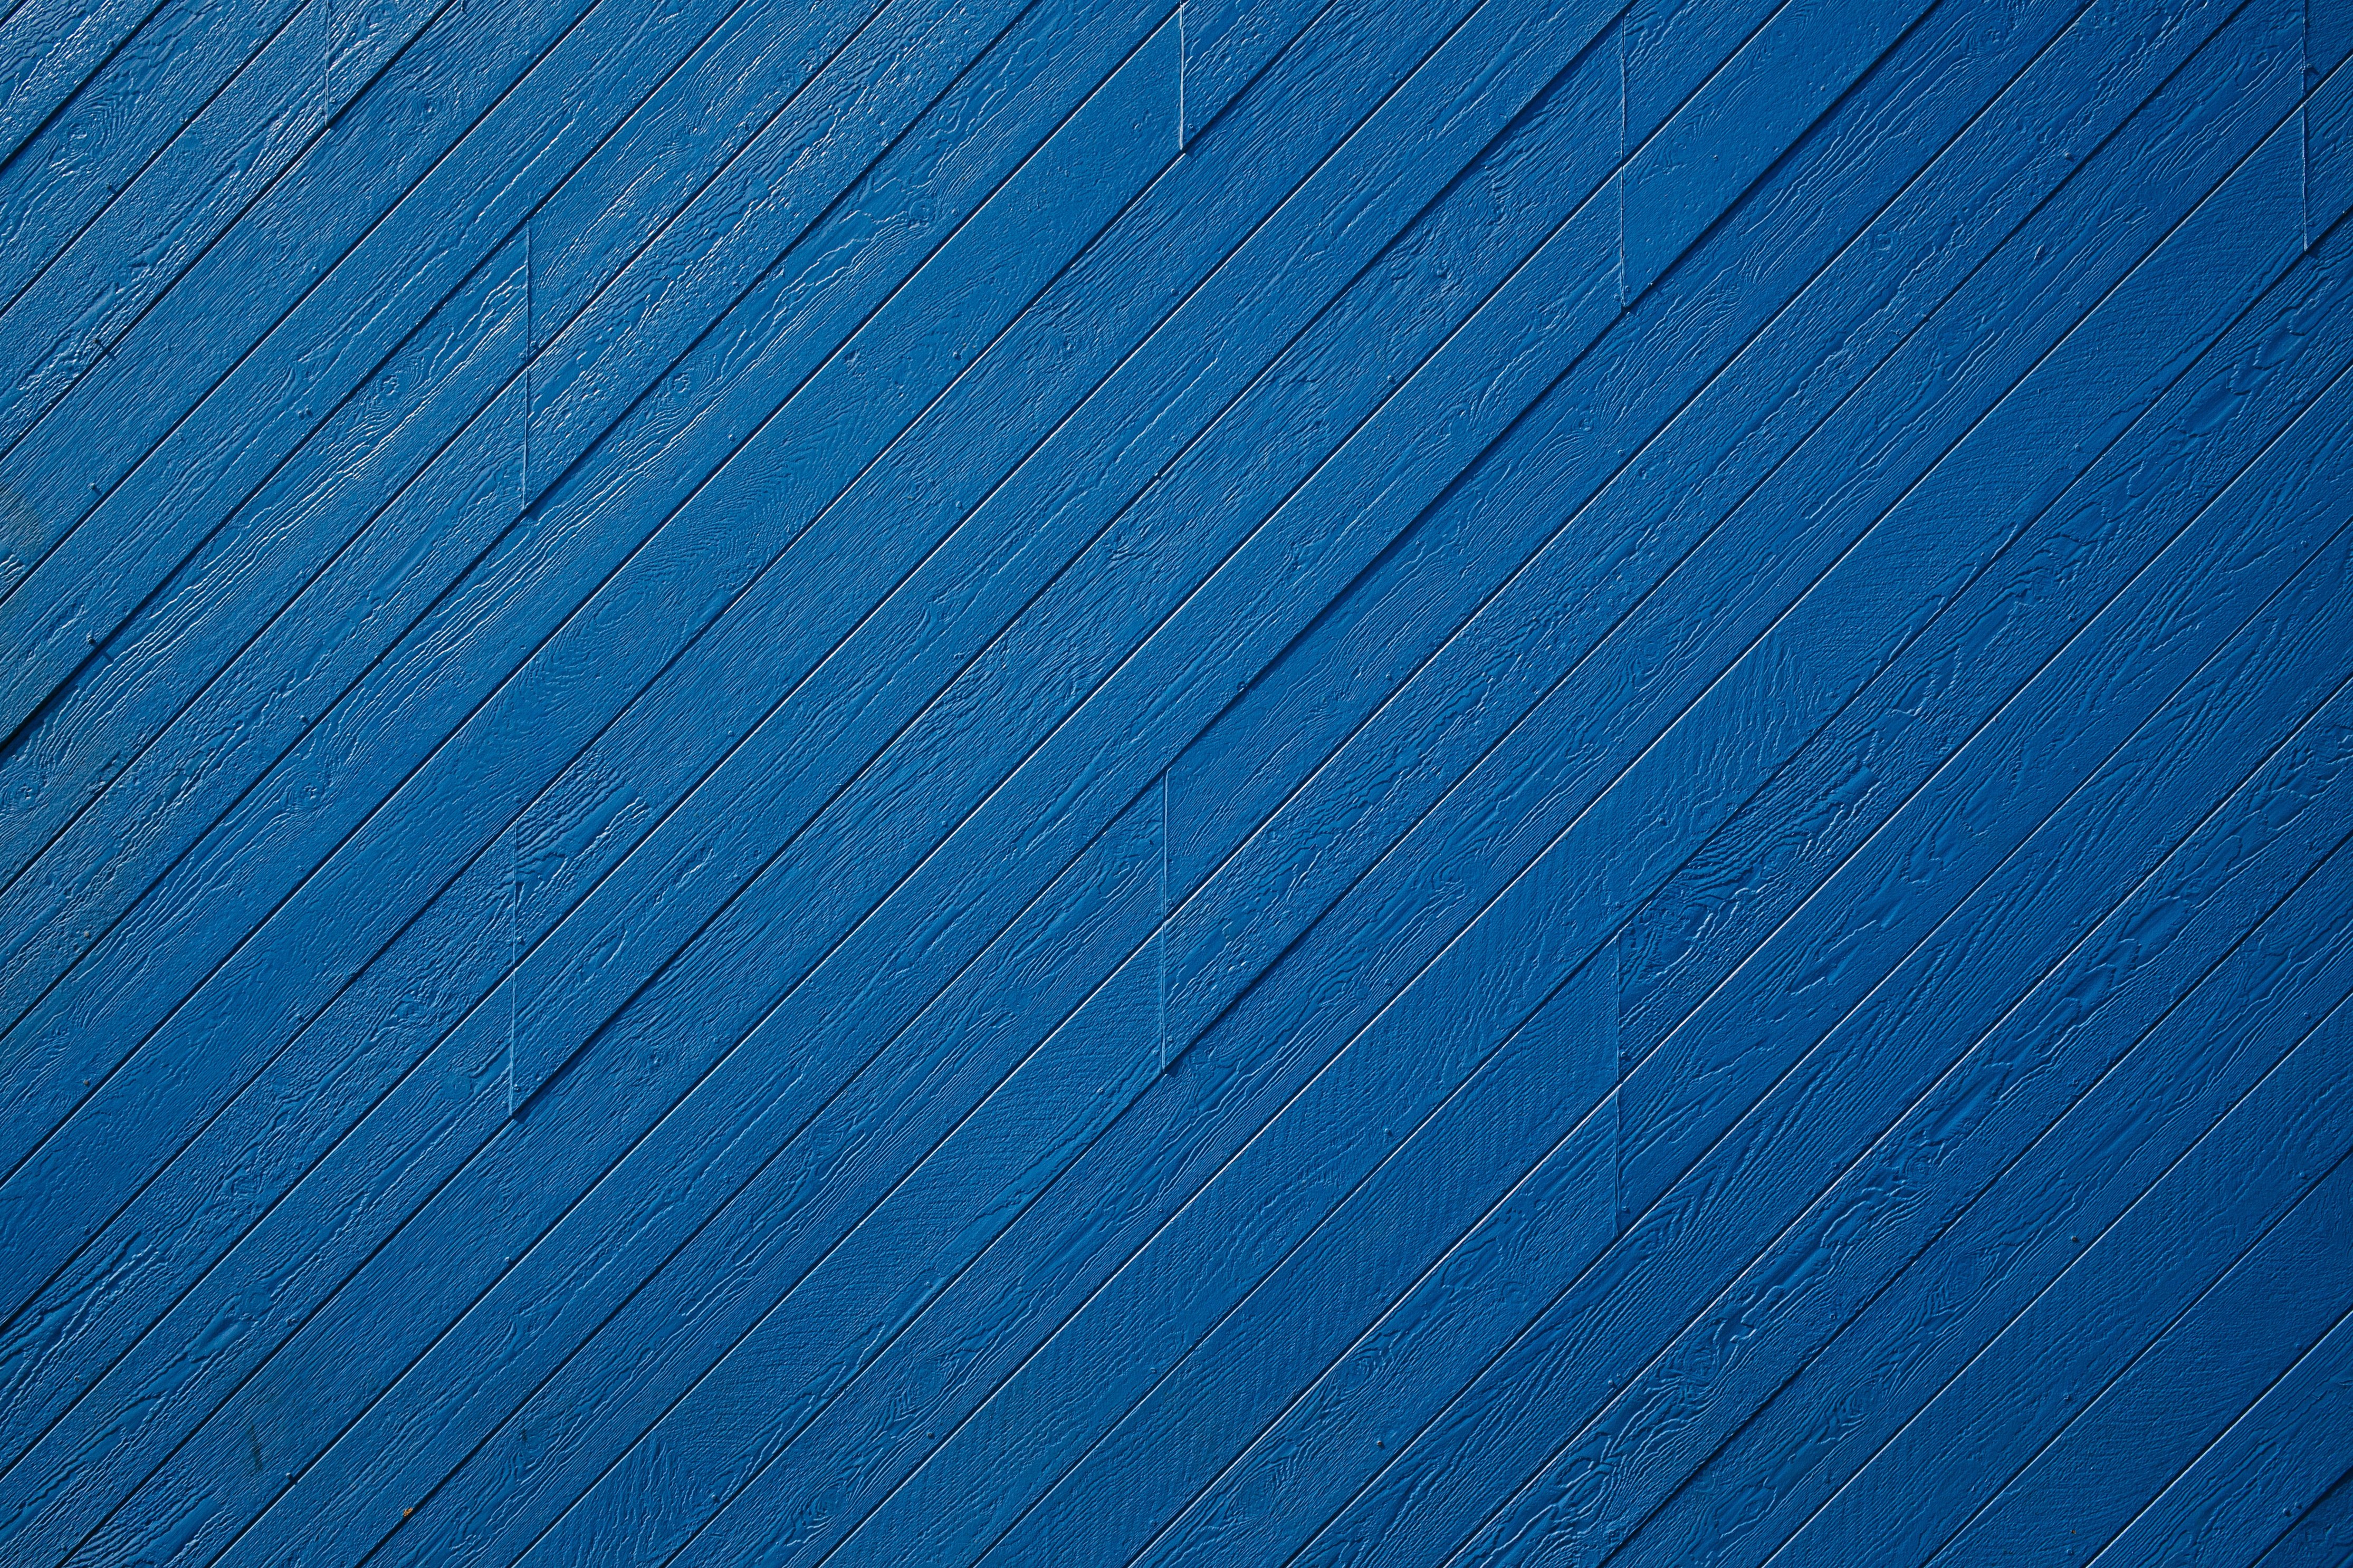 Cool Wallpapers textures, obliquely, blue, wood, wooden, texture, paint, wall